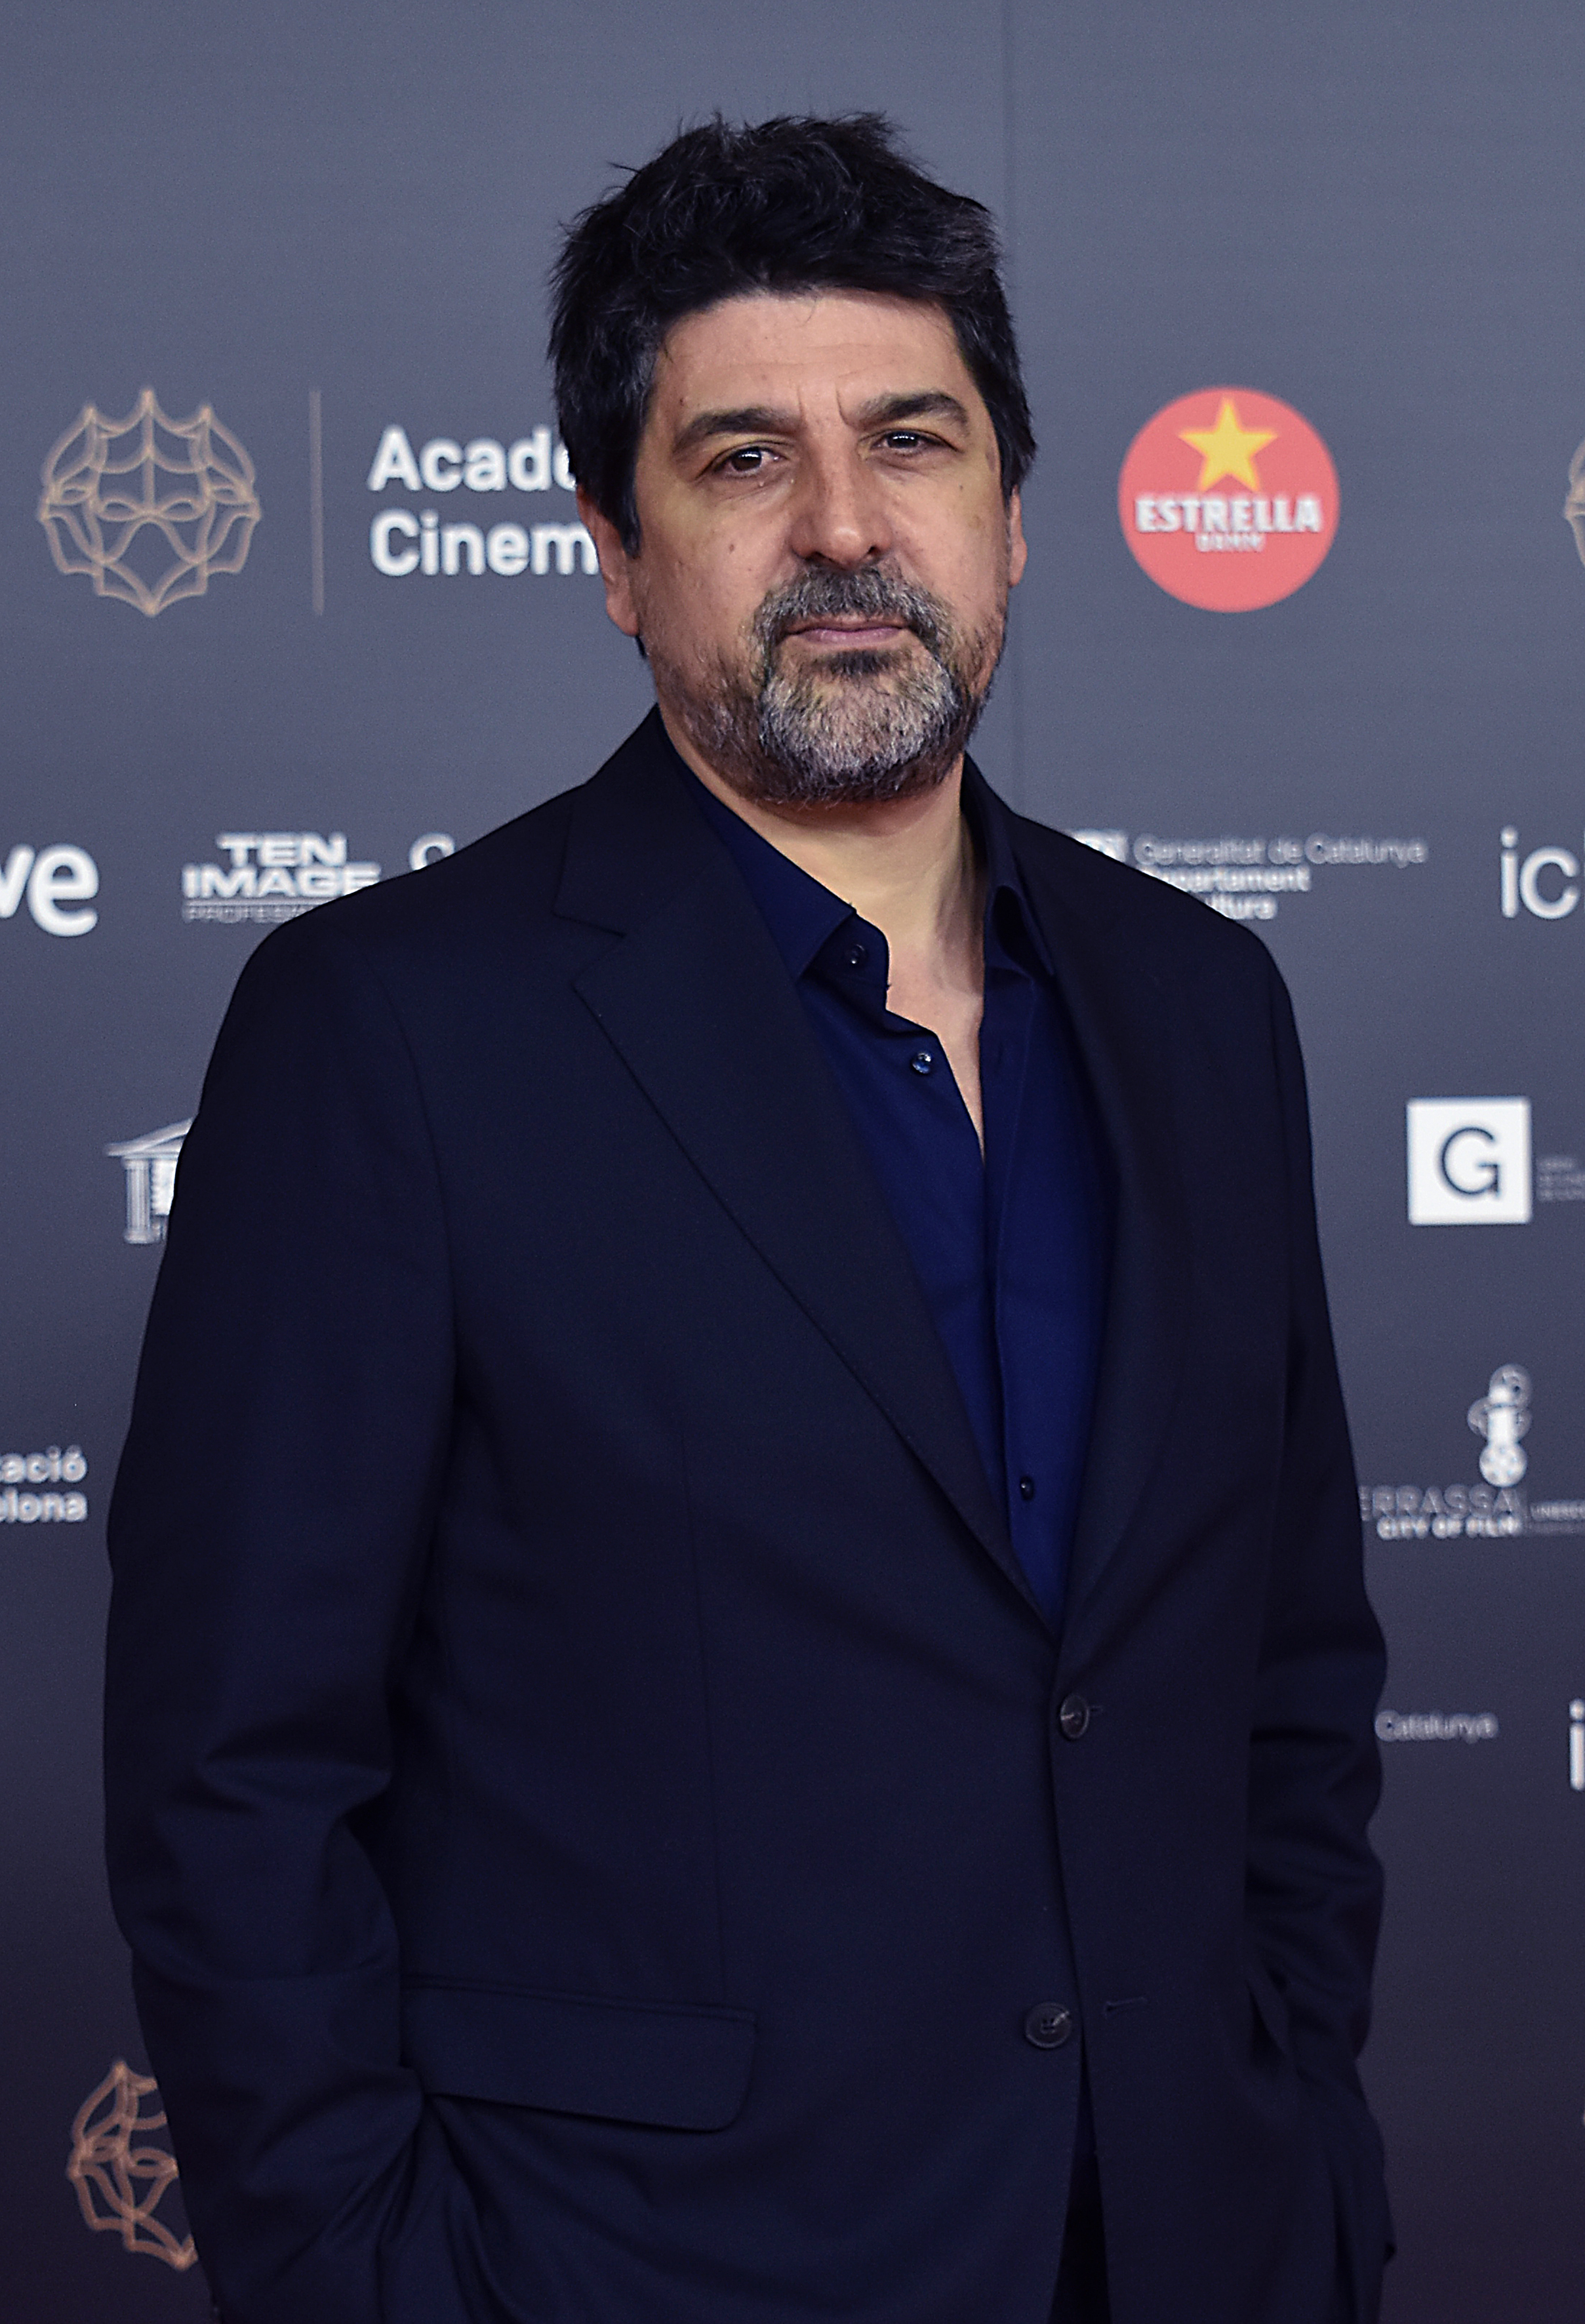 Attending the 13rd [[Gaudí Awards]] in 2021